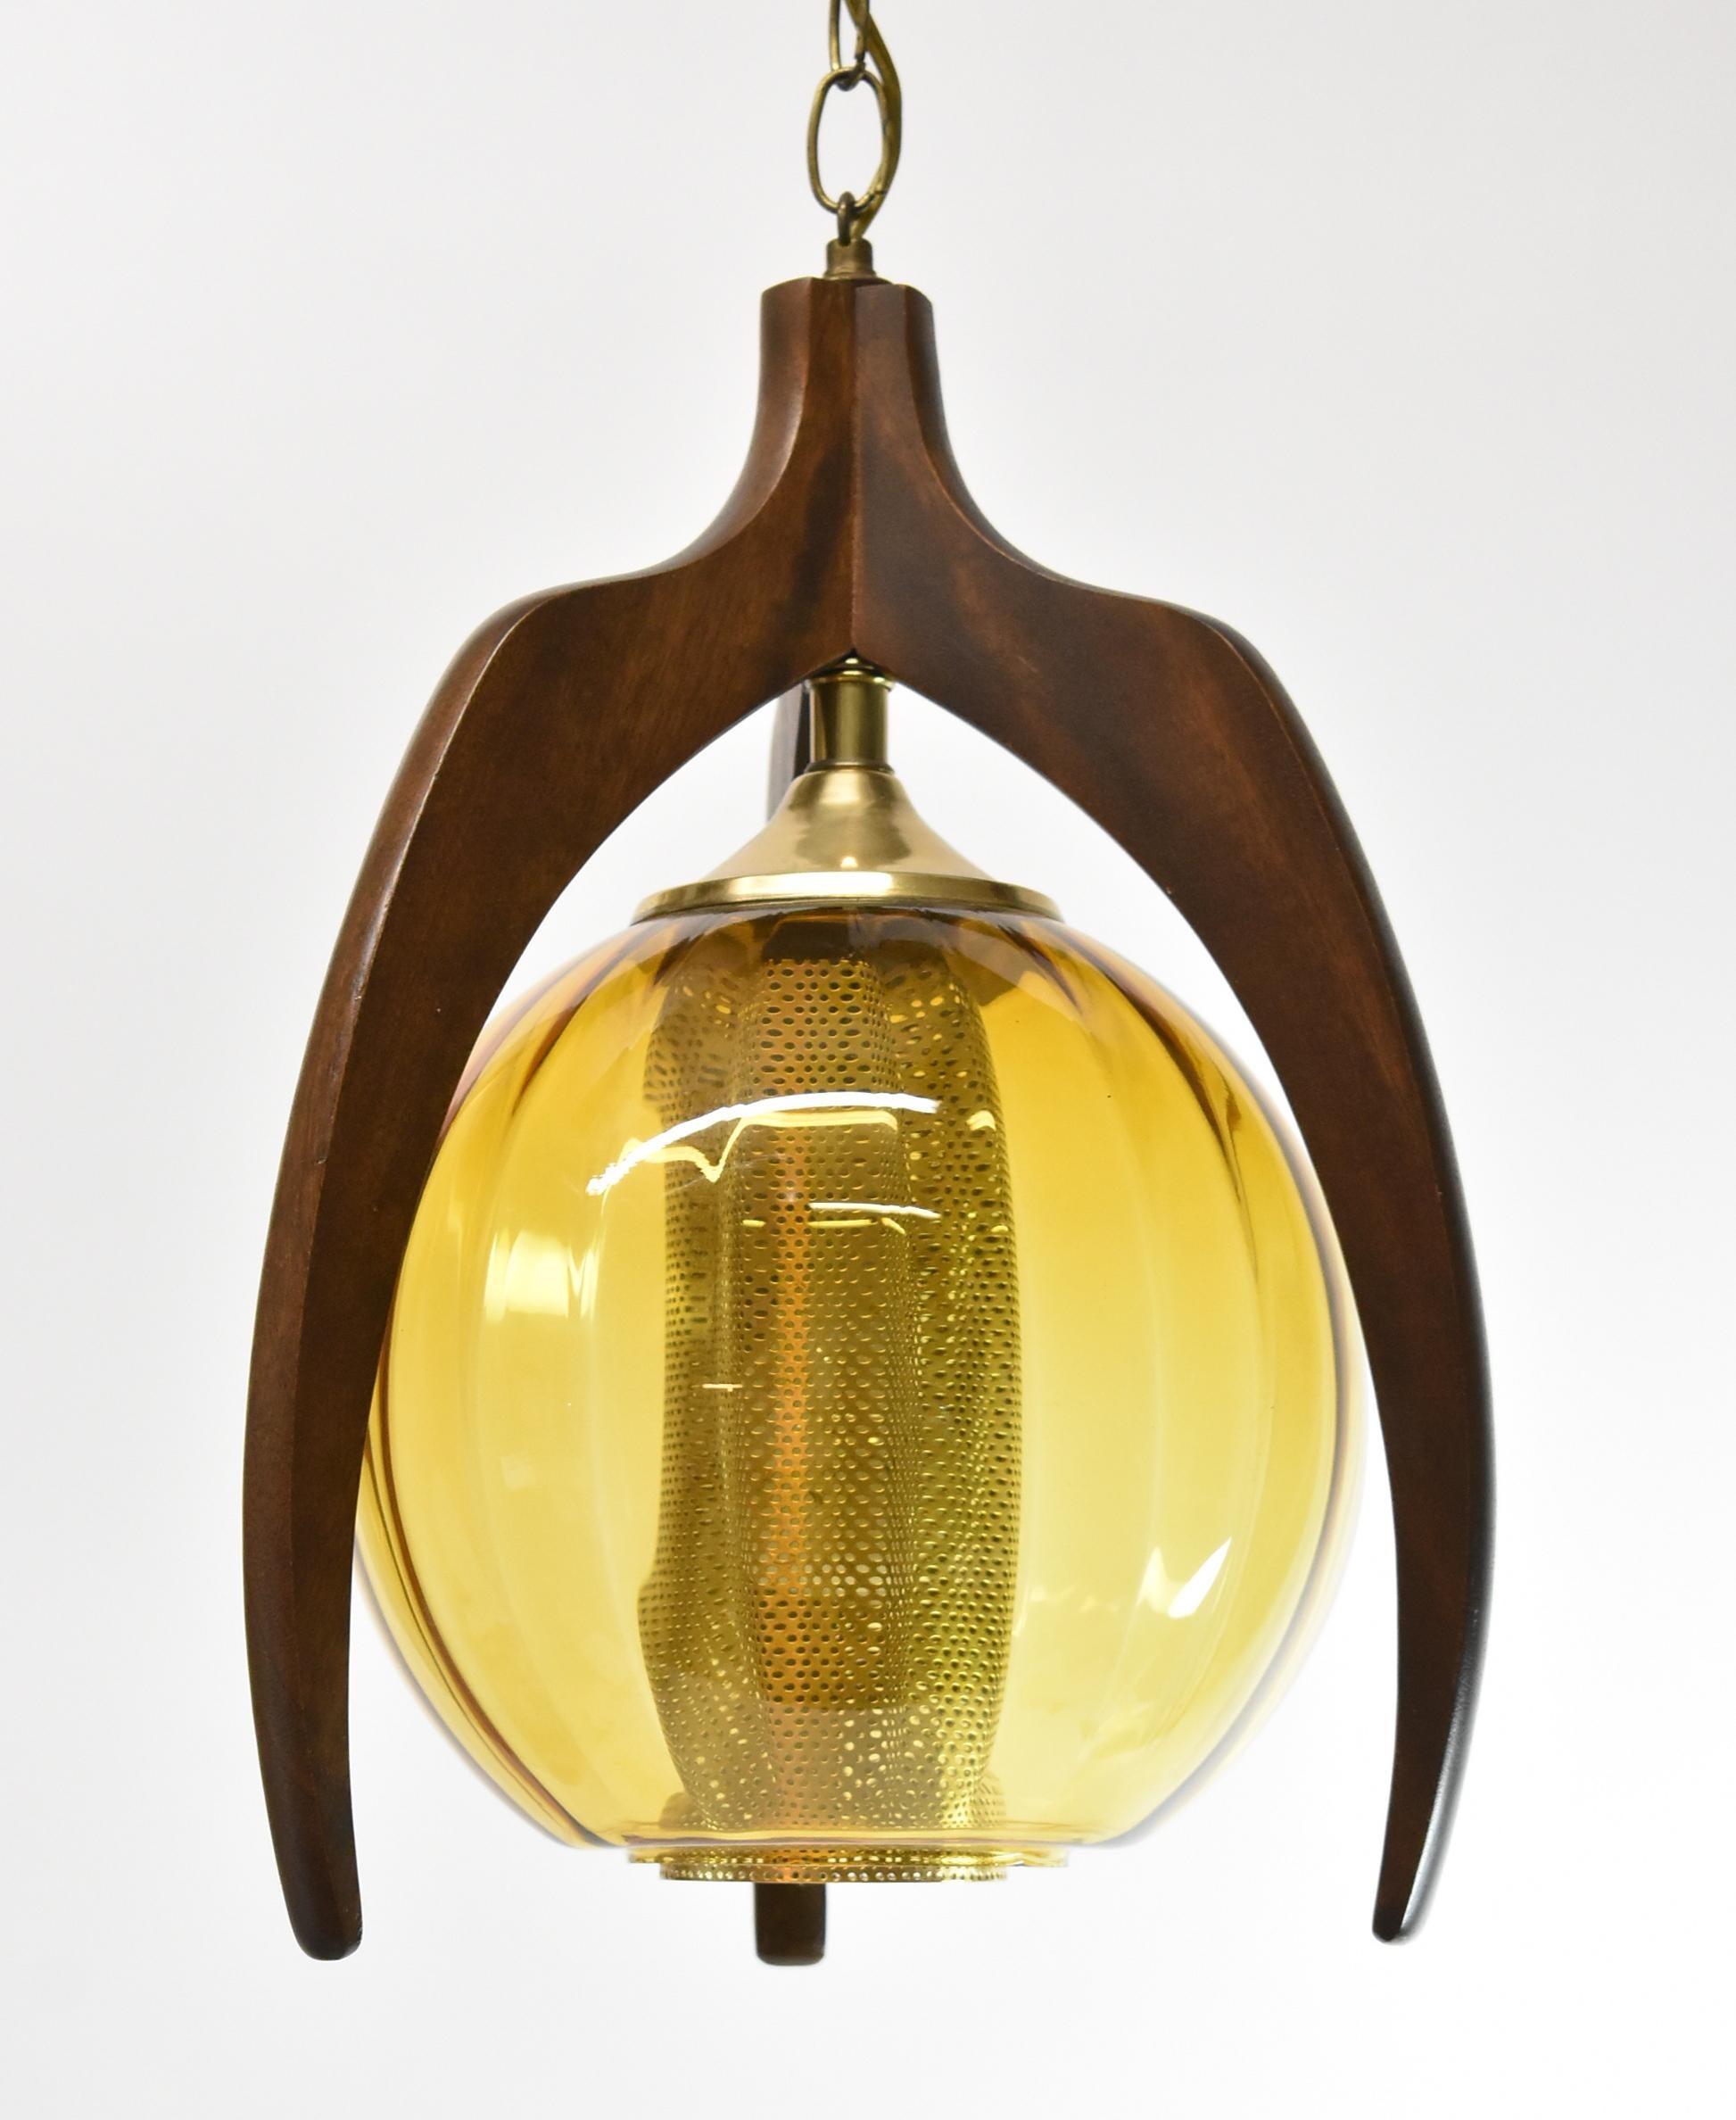 Mid Century Modern hanging pendant light. Walnut three point frame with round amber glass globe shade. Single socket. Circa 1960's by Pearsall. Dimensions: 16.5